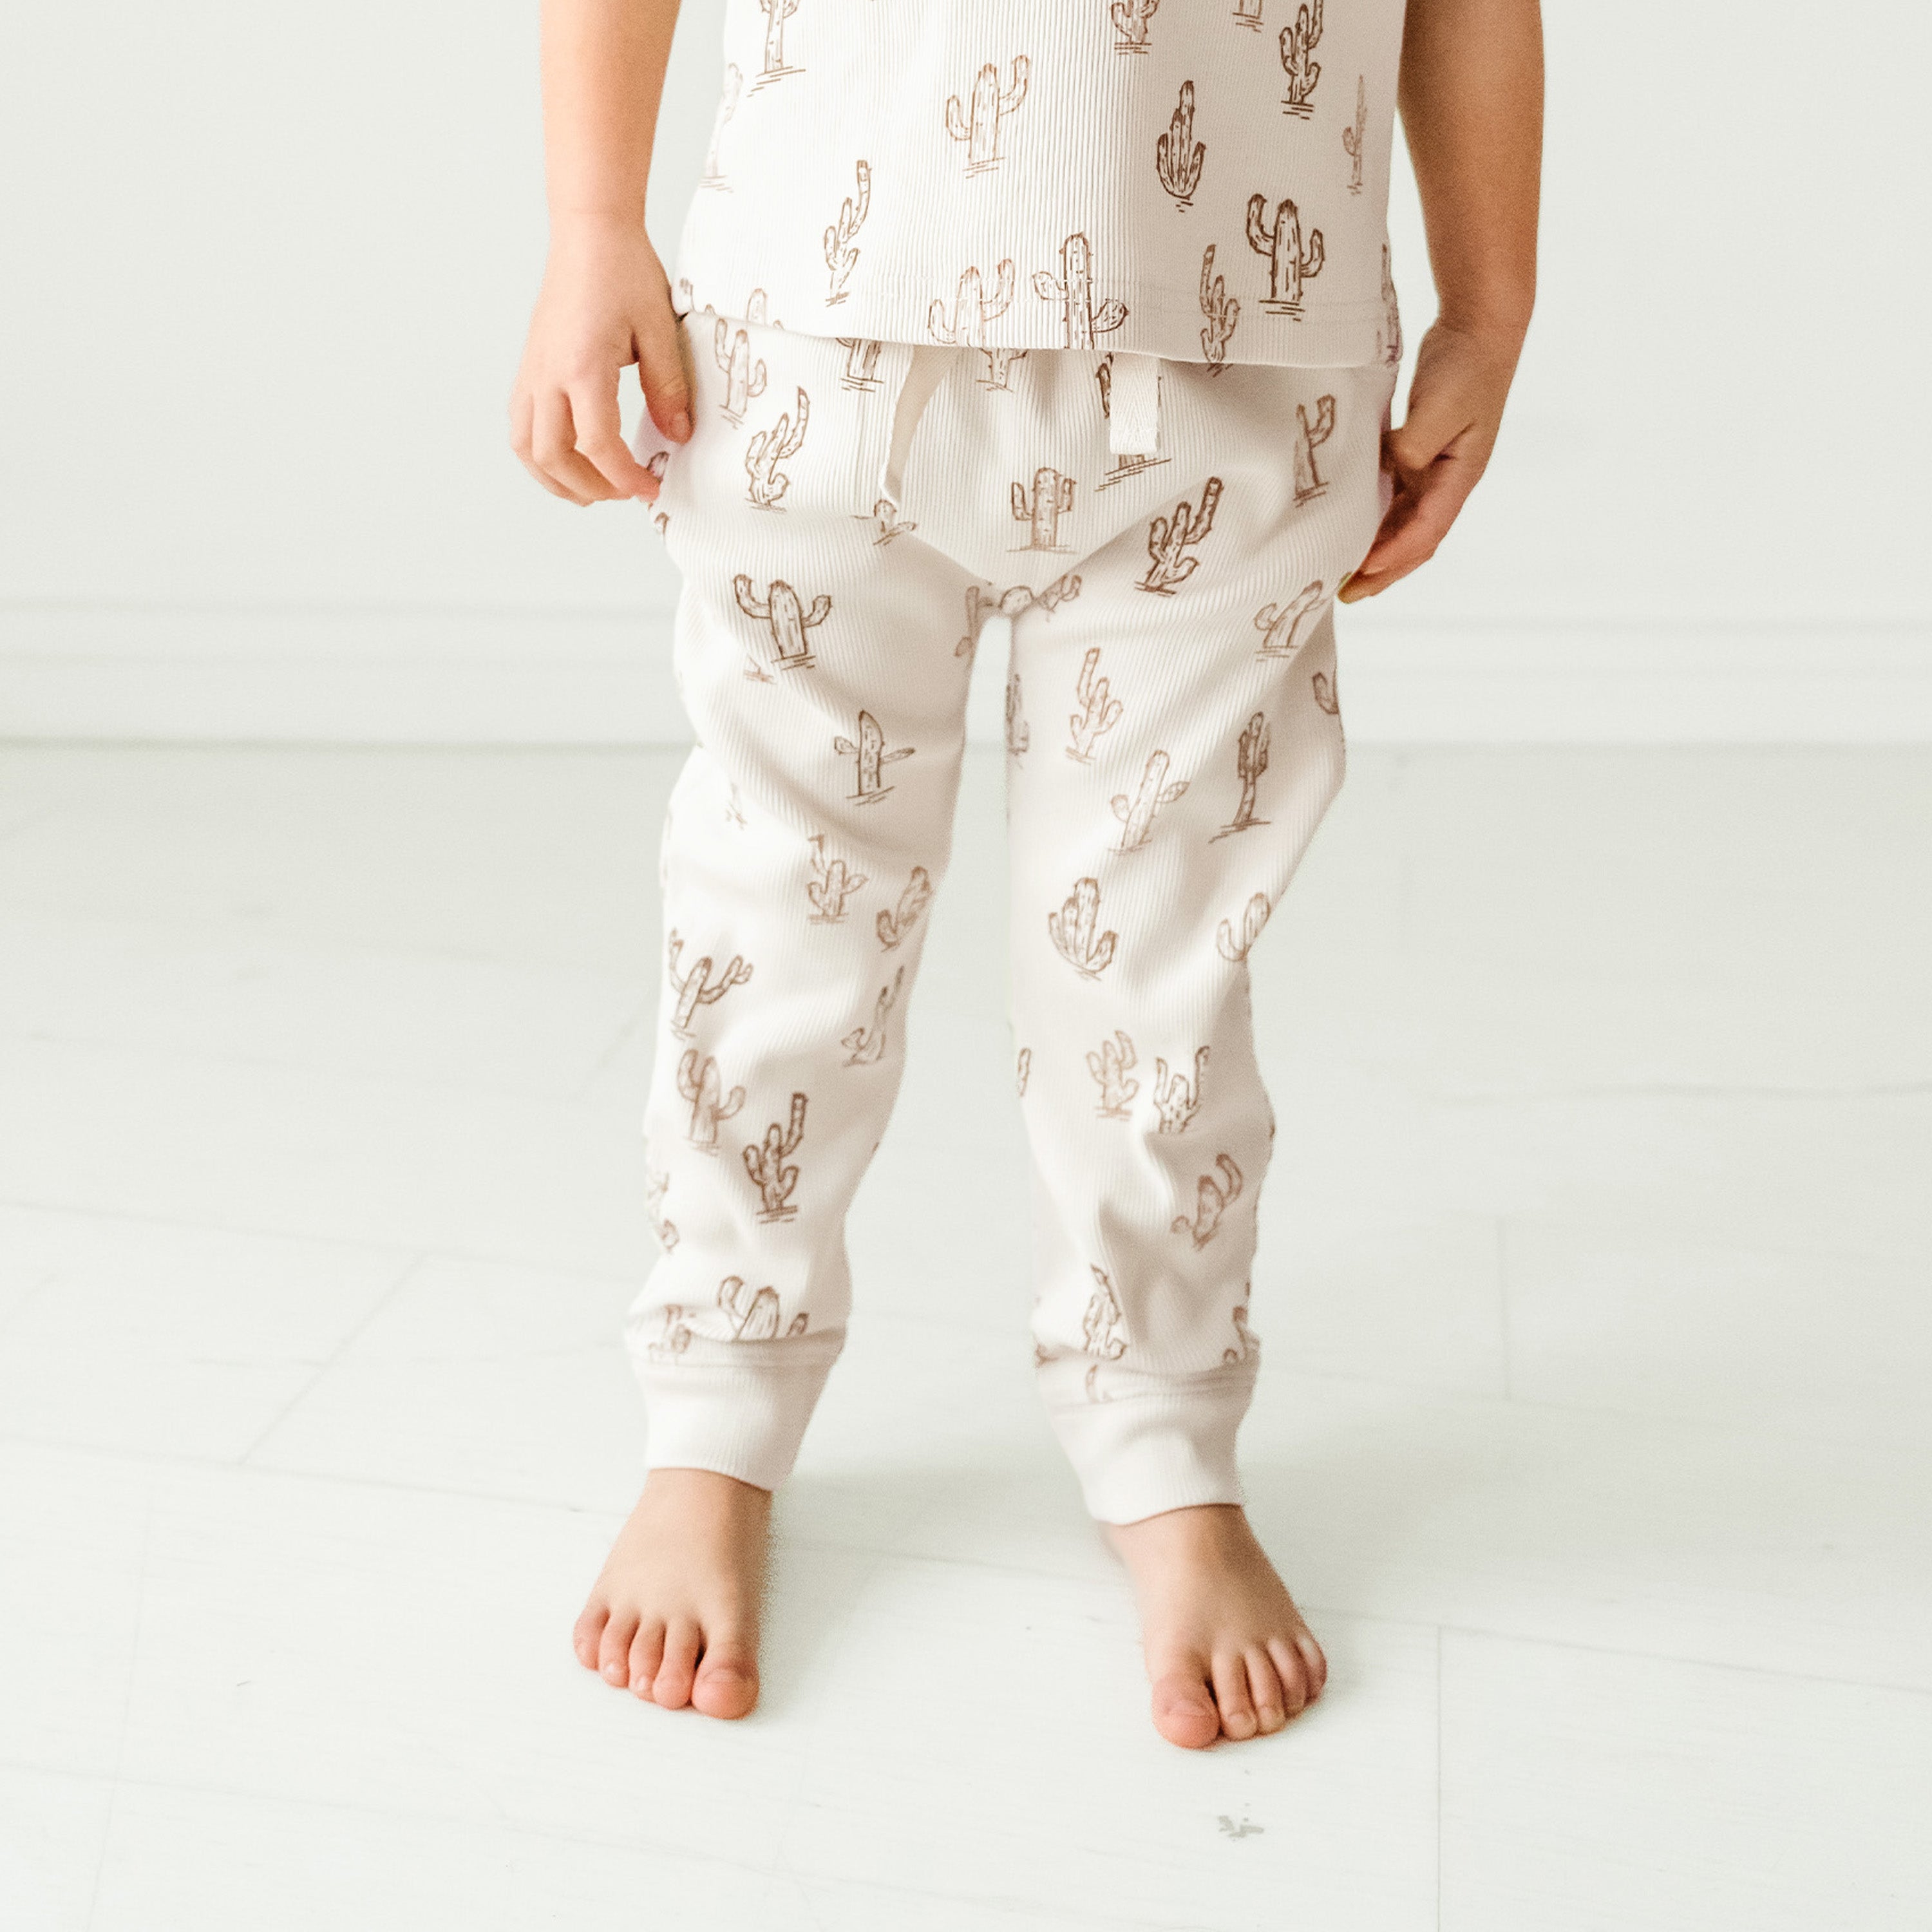 A baby wearing Makemake Organics' Organic Harem Pants in the Cactus pattern, including pants and a shirt with a ruffled hem, stands barefoot on a white floor against a white background.